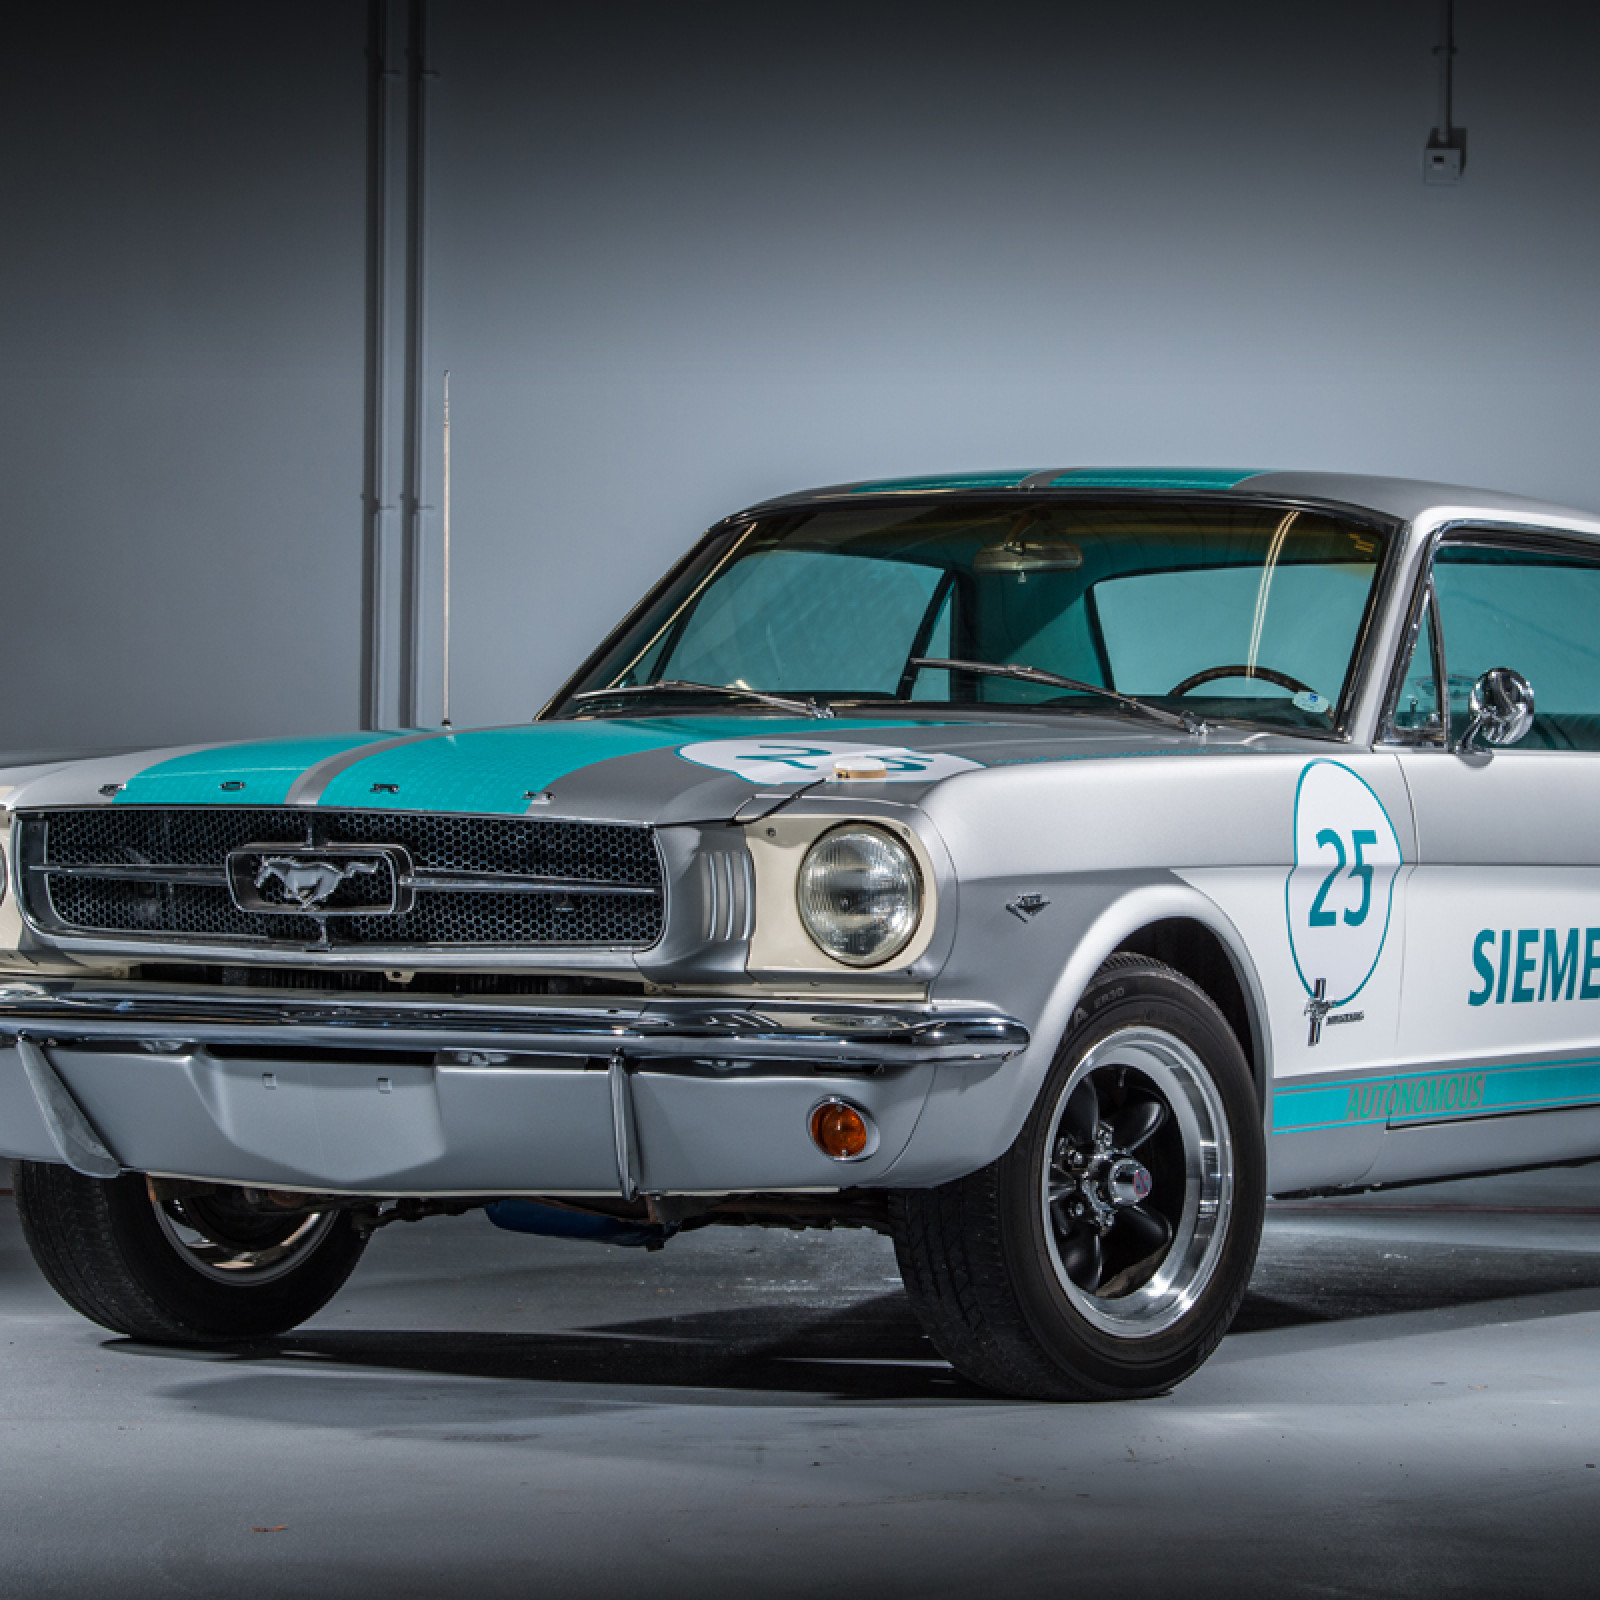 Siemens converts 53-year-old muscle car to drive a...